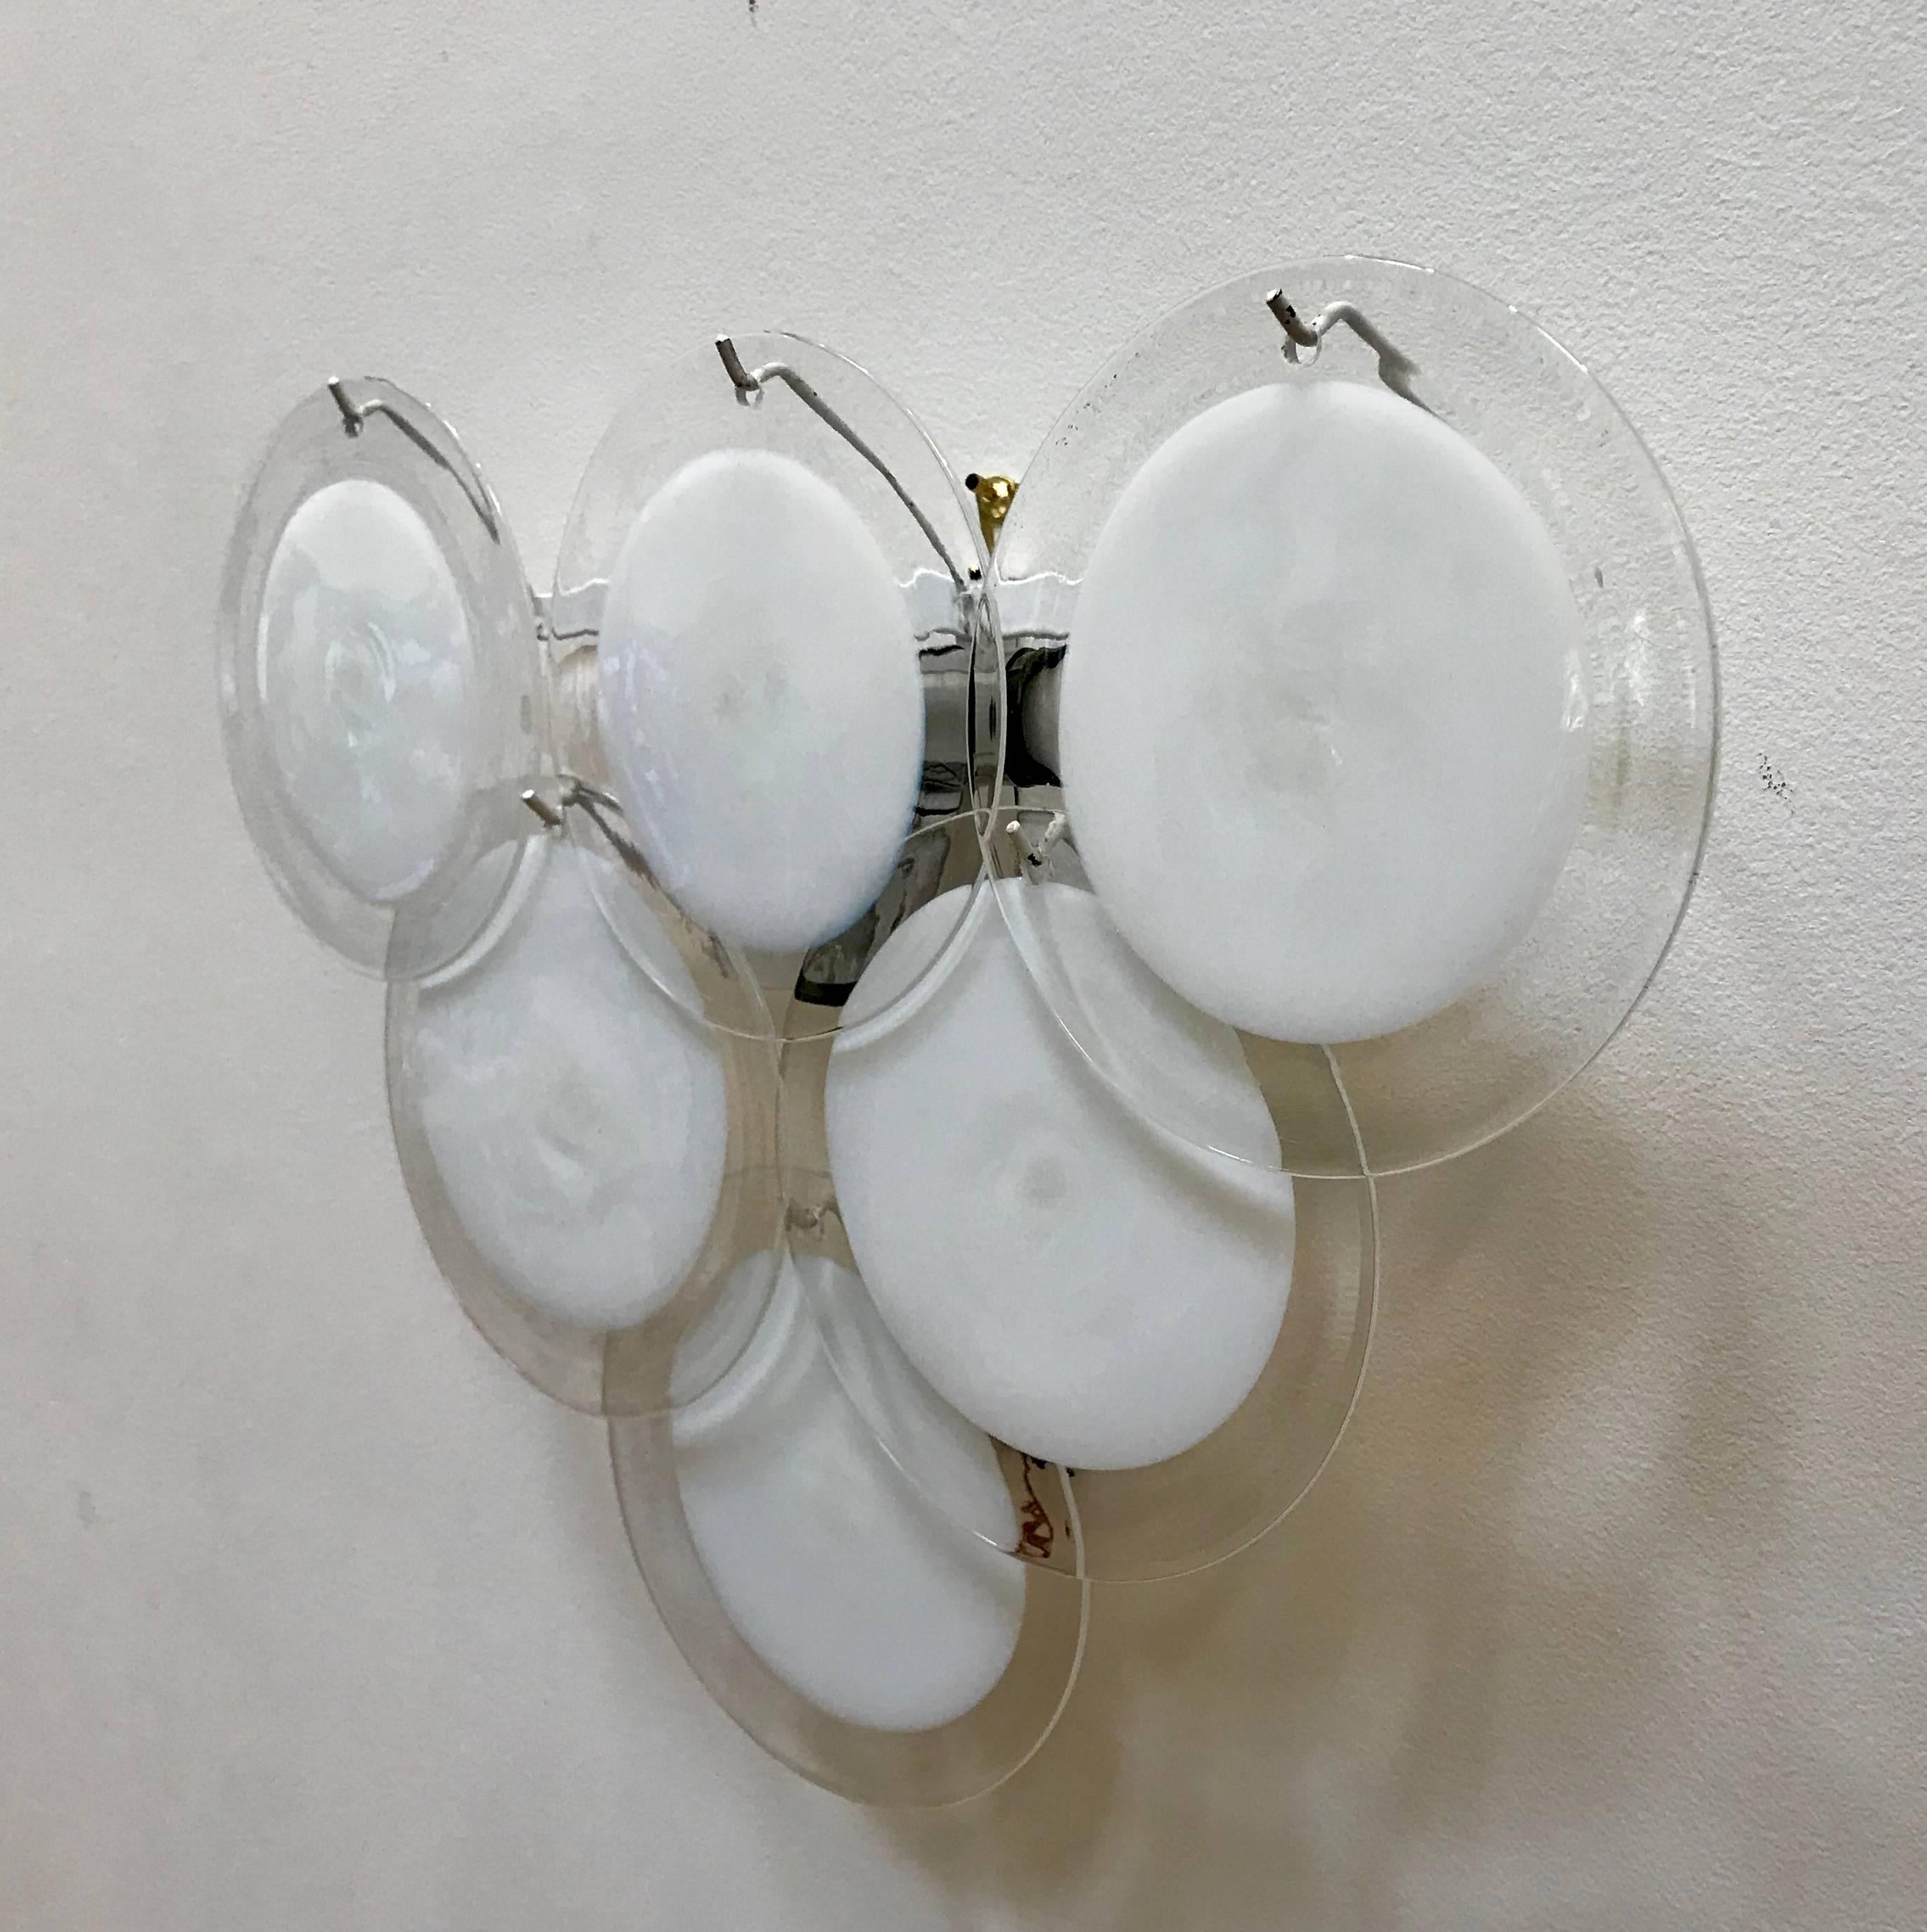 Very nice pair of Vistosi wall sconces, Murano, Italy, 1970s. Each handblown clear and milk white glass disc hangs from the metal wall-mounted fixture. One chrome socket cover is missing, please see photo.